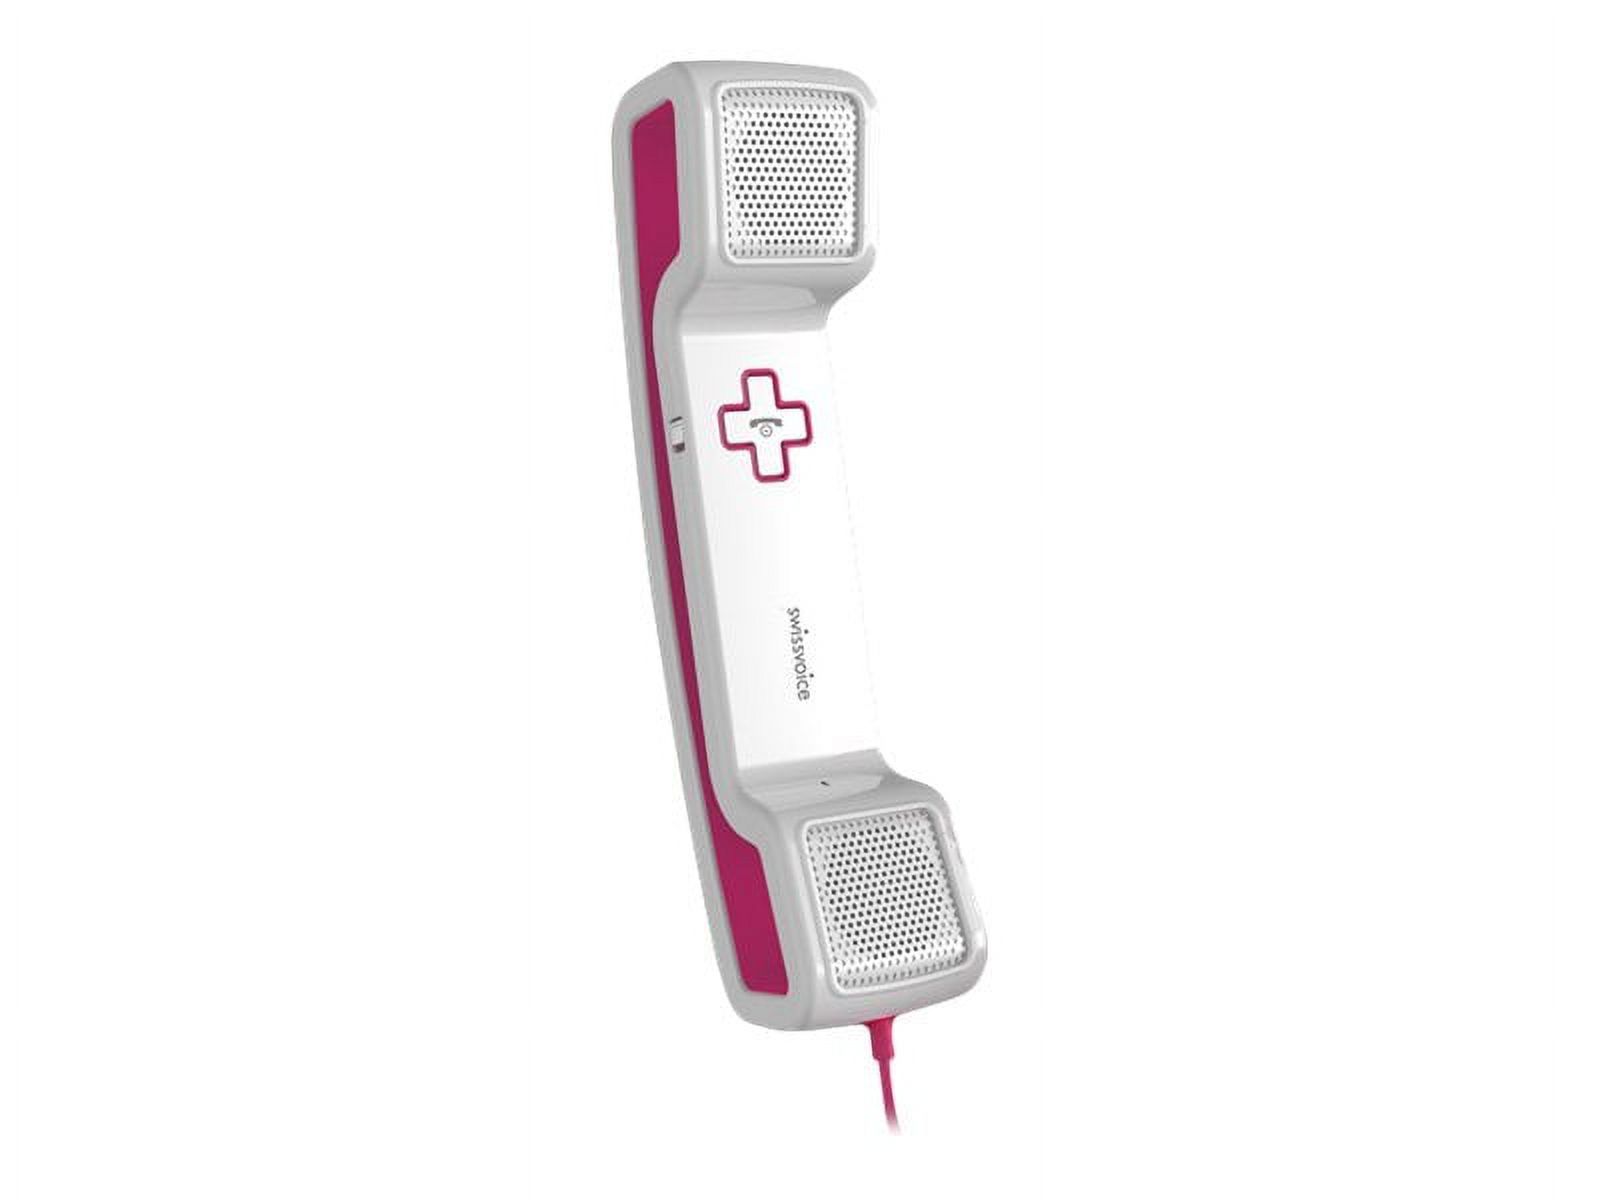 Swissvoice ePure CH05 - Handset for cellular phone - white, pink - for Apple iPhone 5 - image 1 of 4